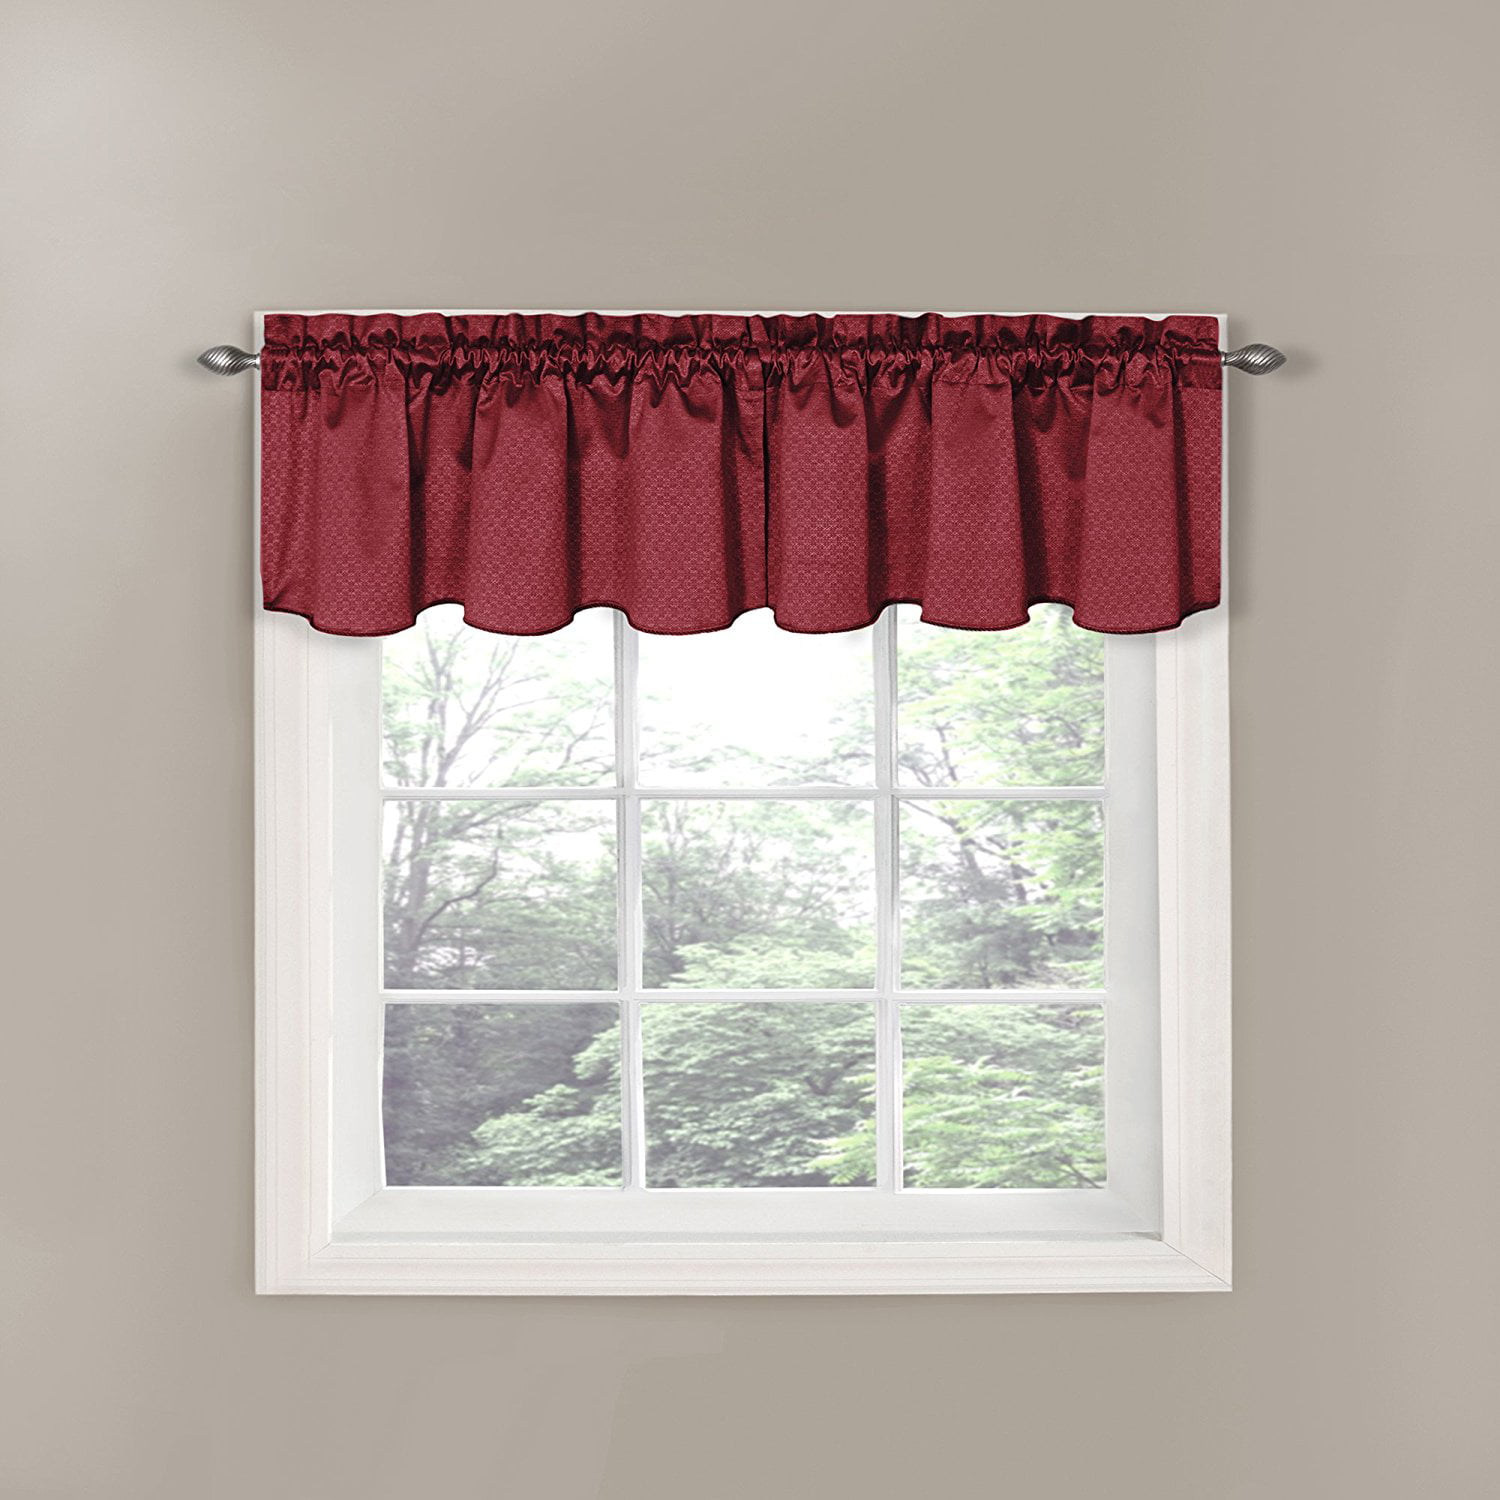 Eclipse Canova 42-Inch by 21-Inch Thermaback Blackout Scallop Valance Burgundy 